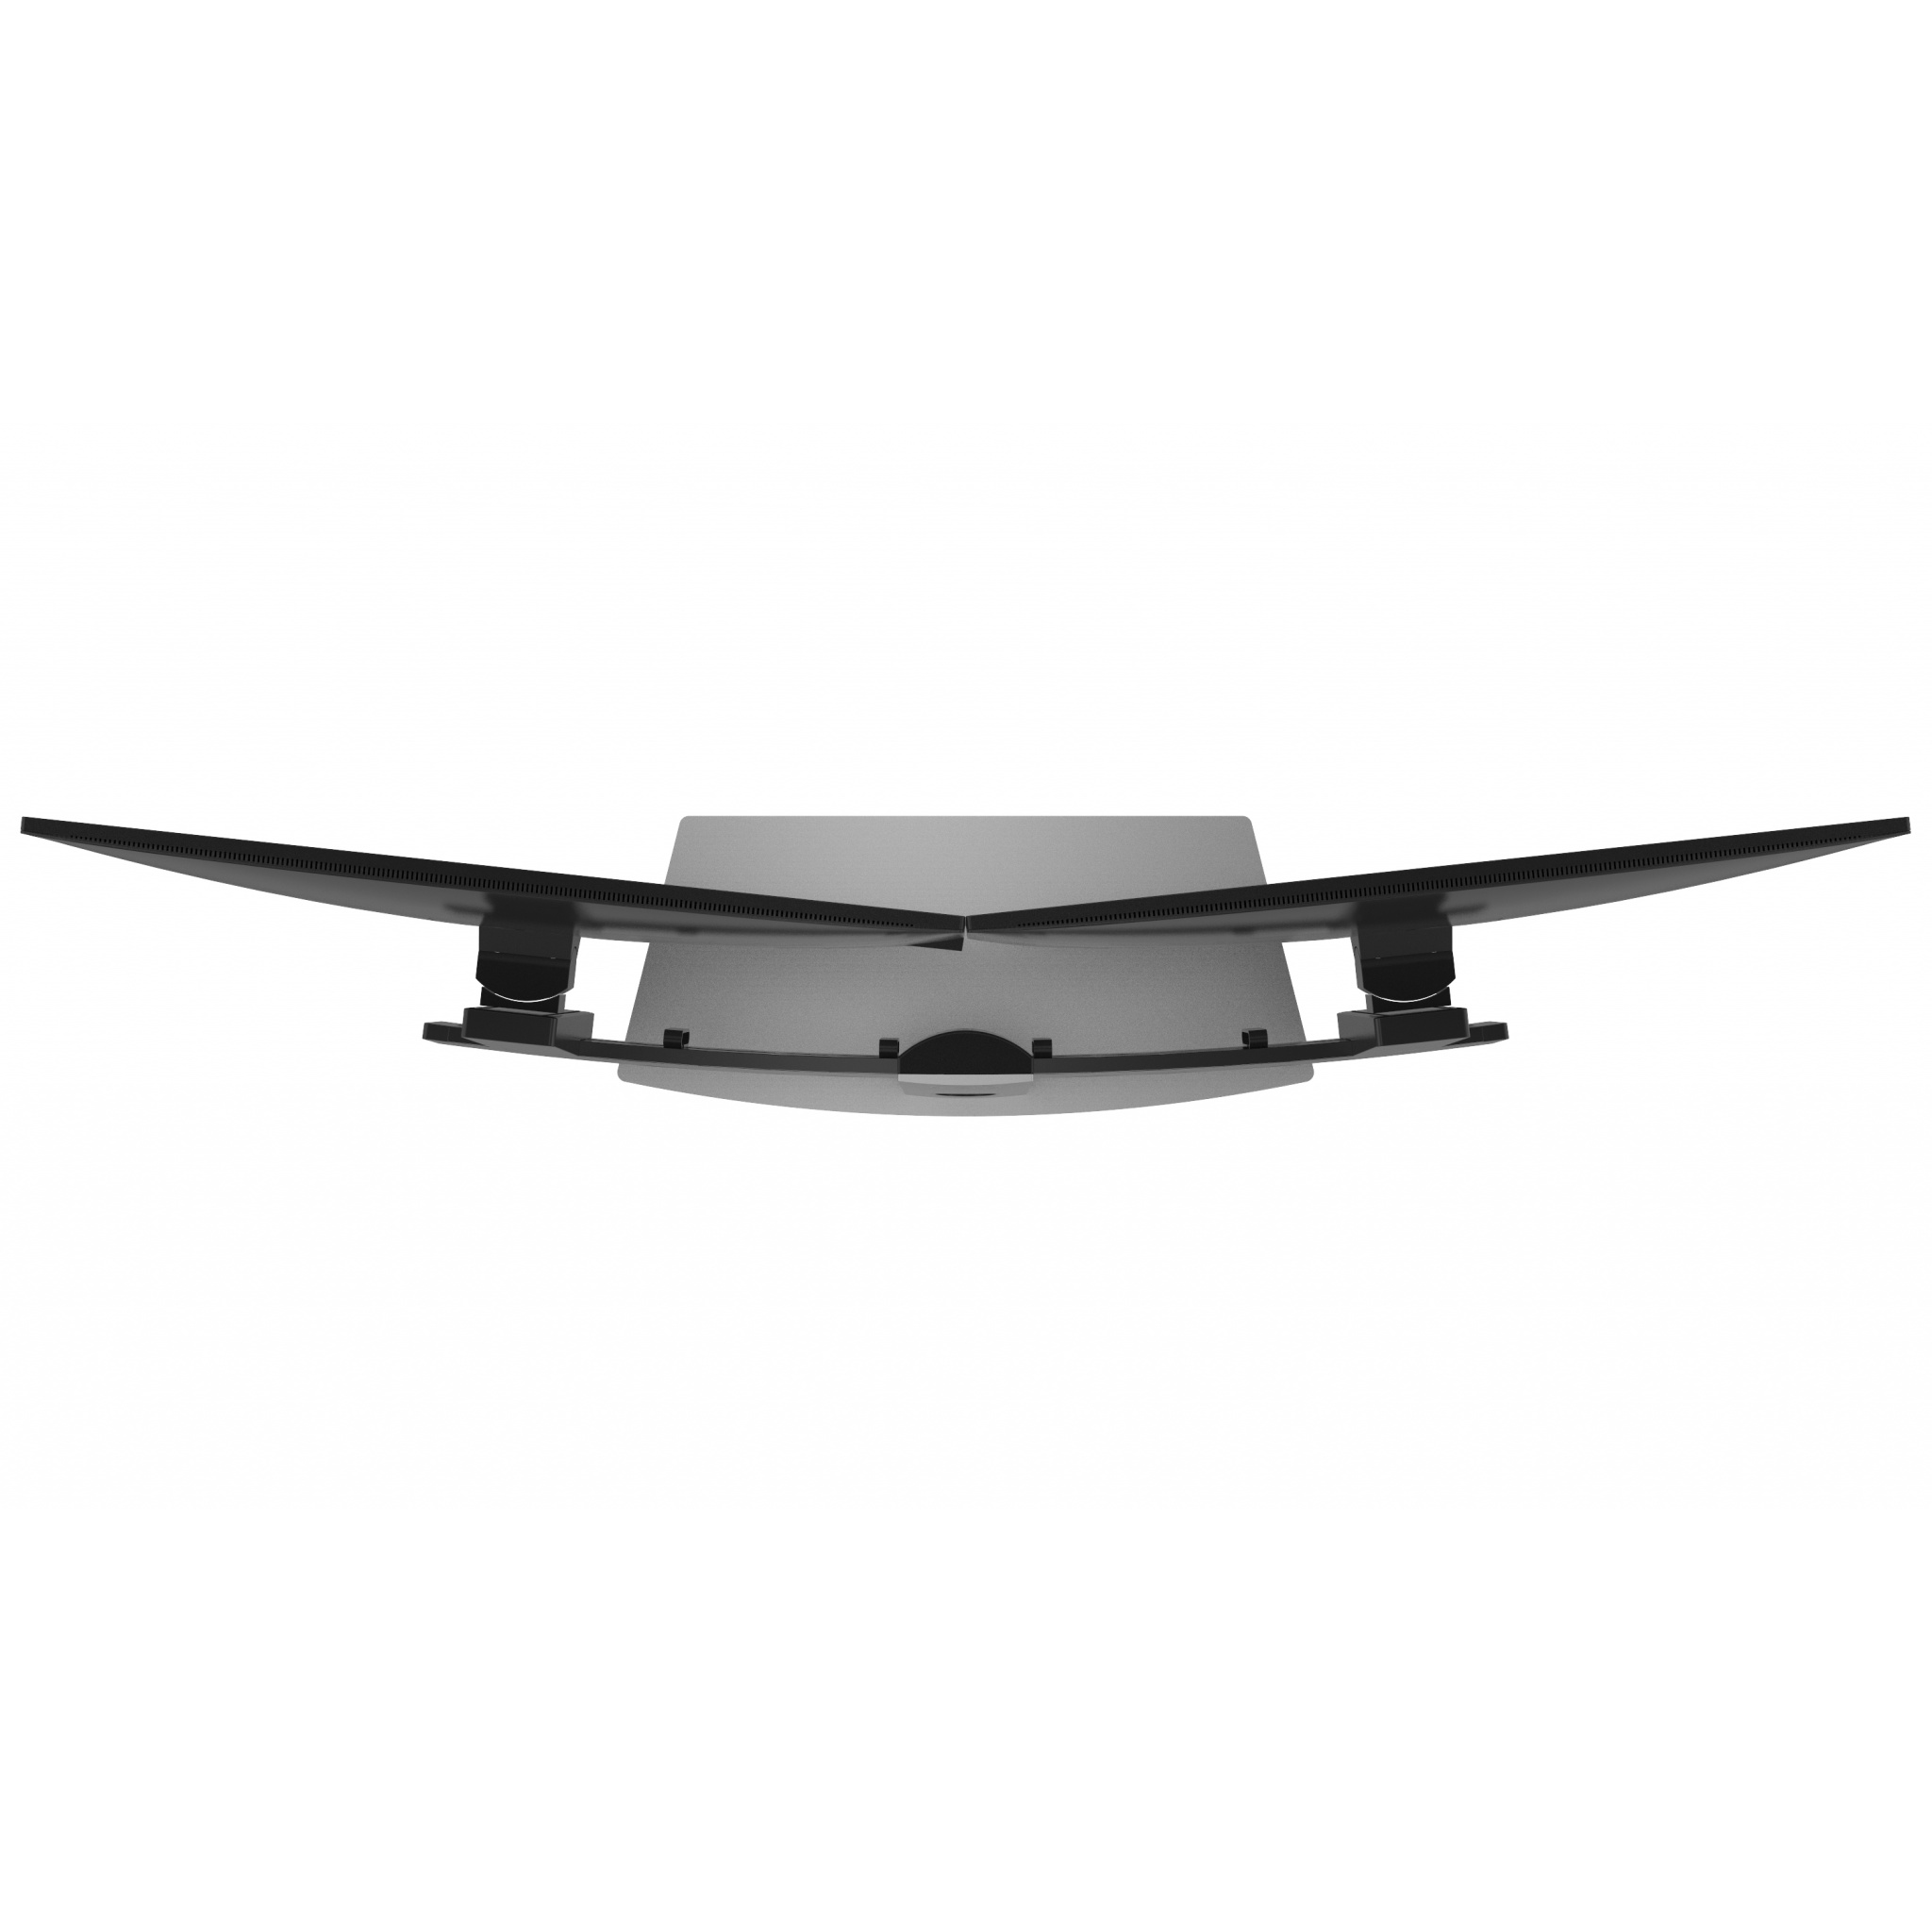 Dell MDS19 Dual Monitor Stand - Up to 27-inch Screen - Aluminum, Black